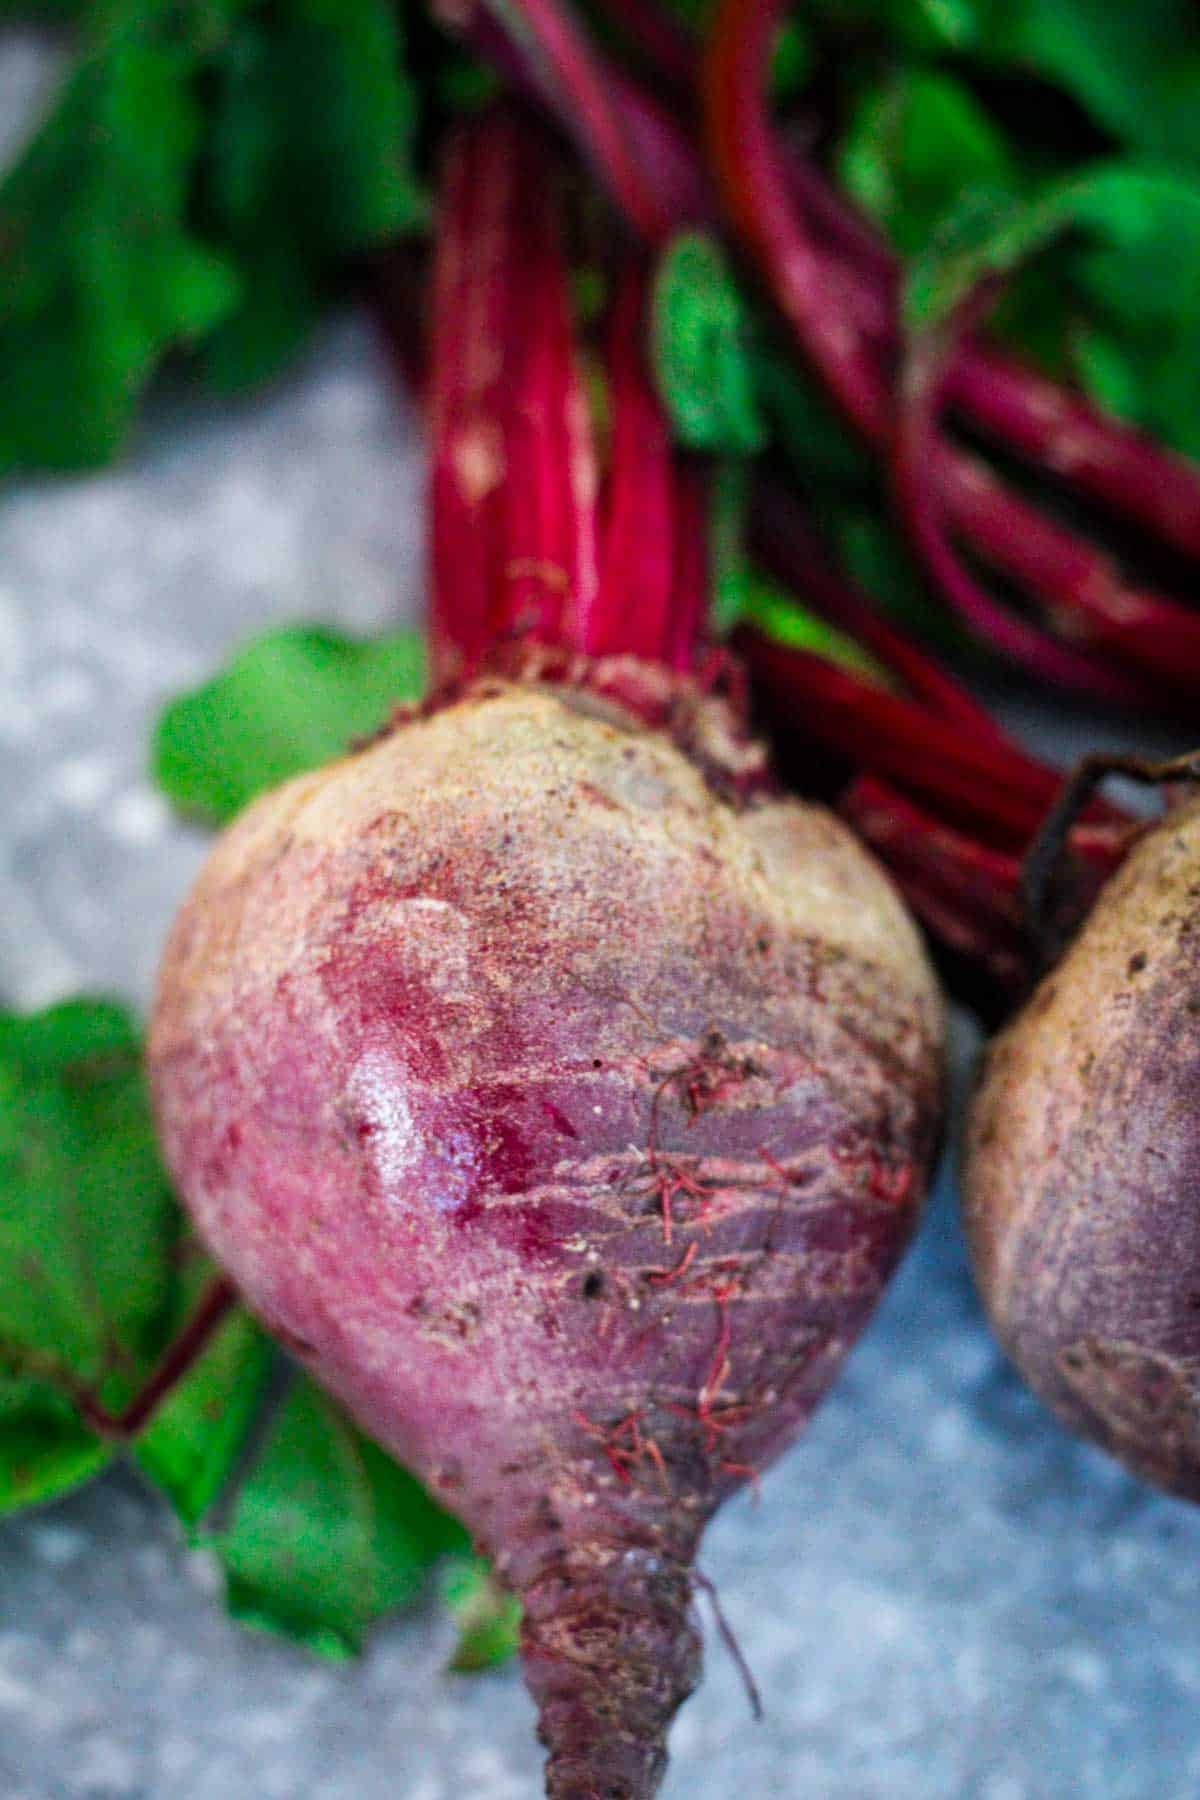 A raw beet, uncooked, un-peeled.